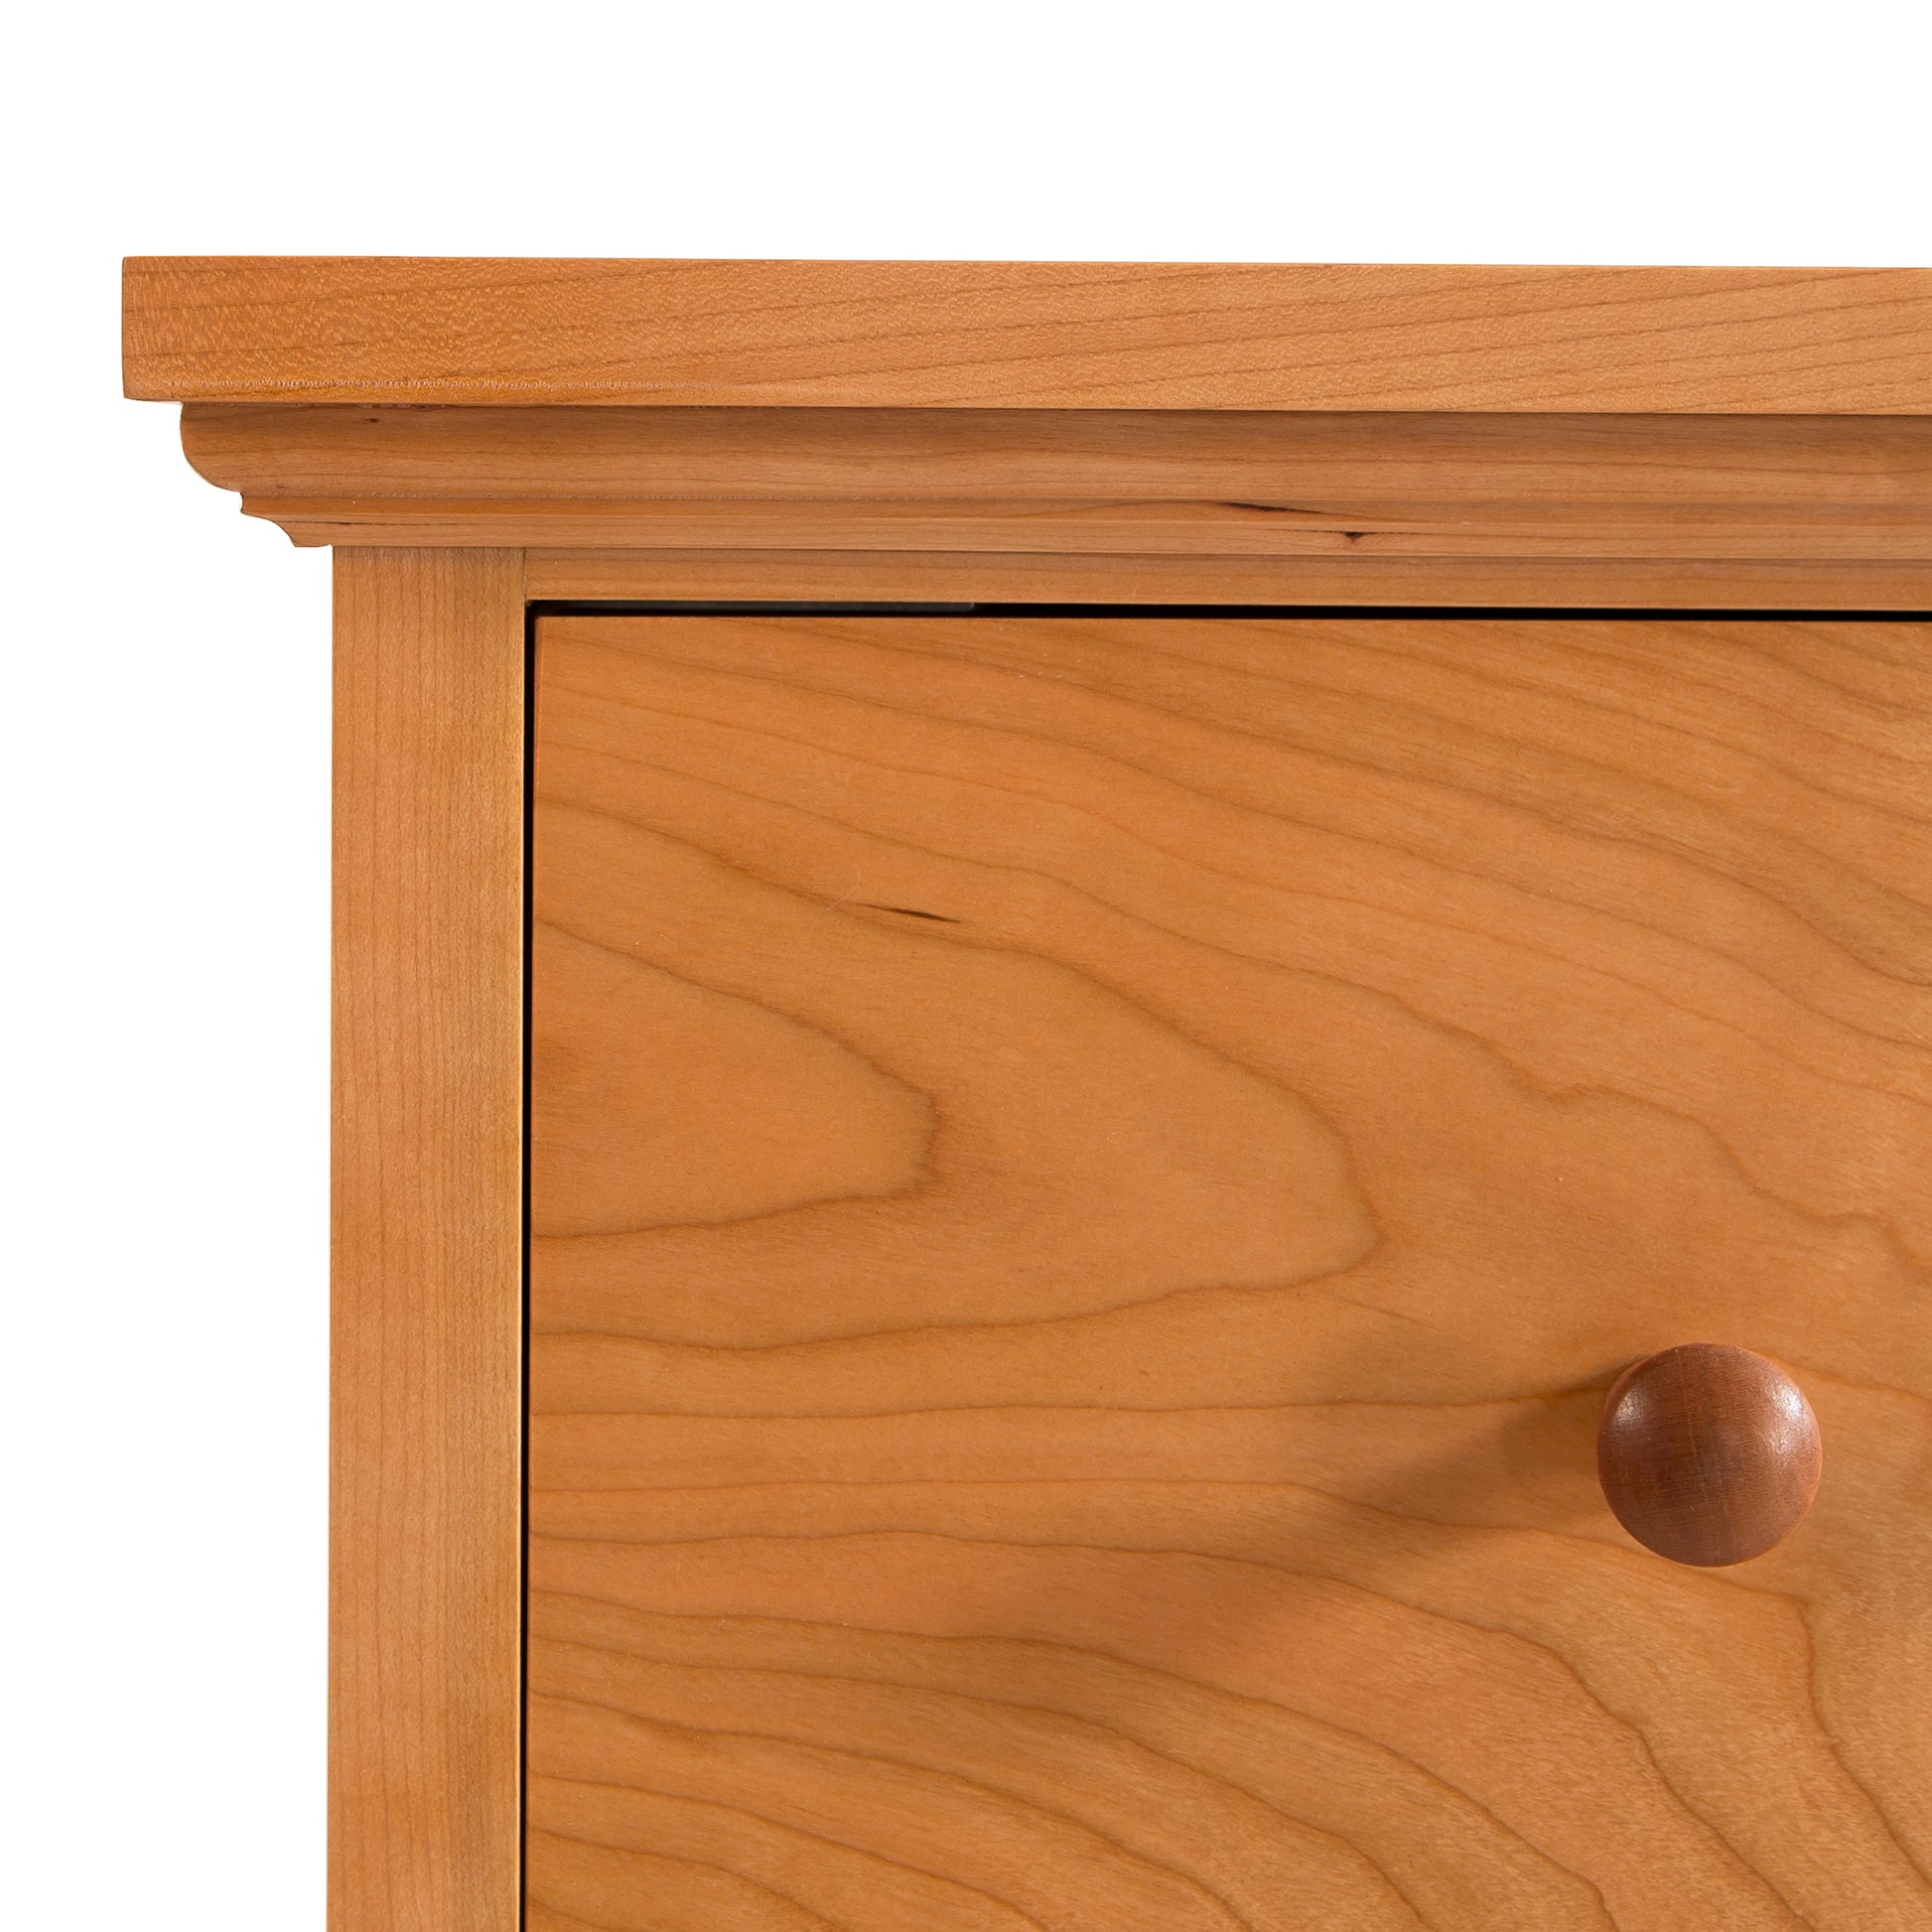 Close-up of a Lyndon Furniture American Country 6-Drawer Dresser corner featuring a smooth, rounded handle and a detailed wood grain pattern, set against a plain white background.